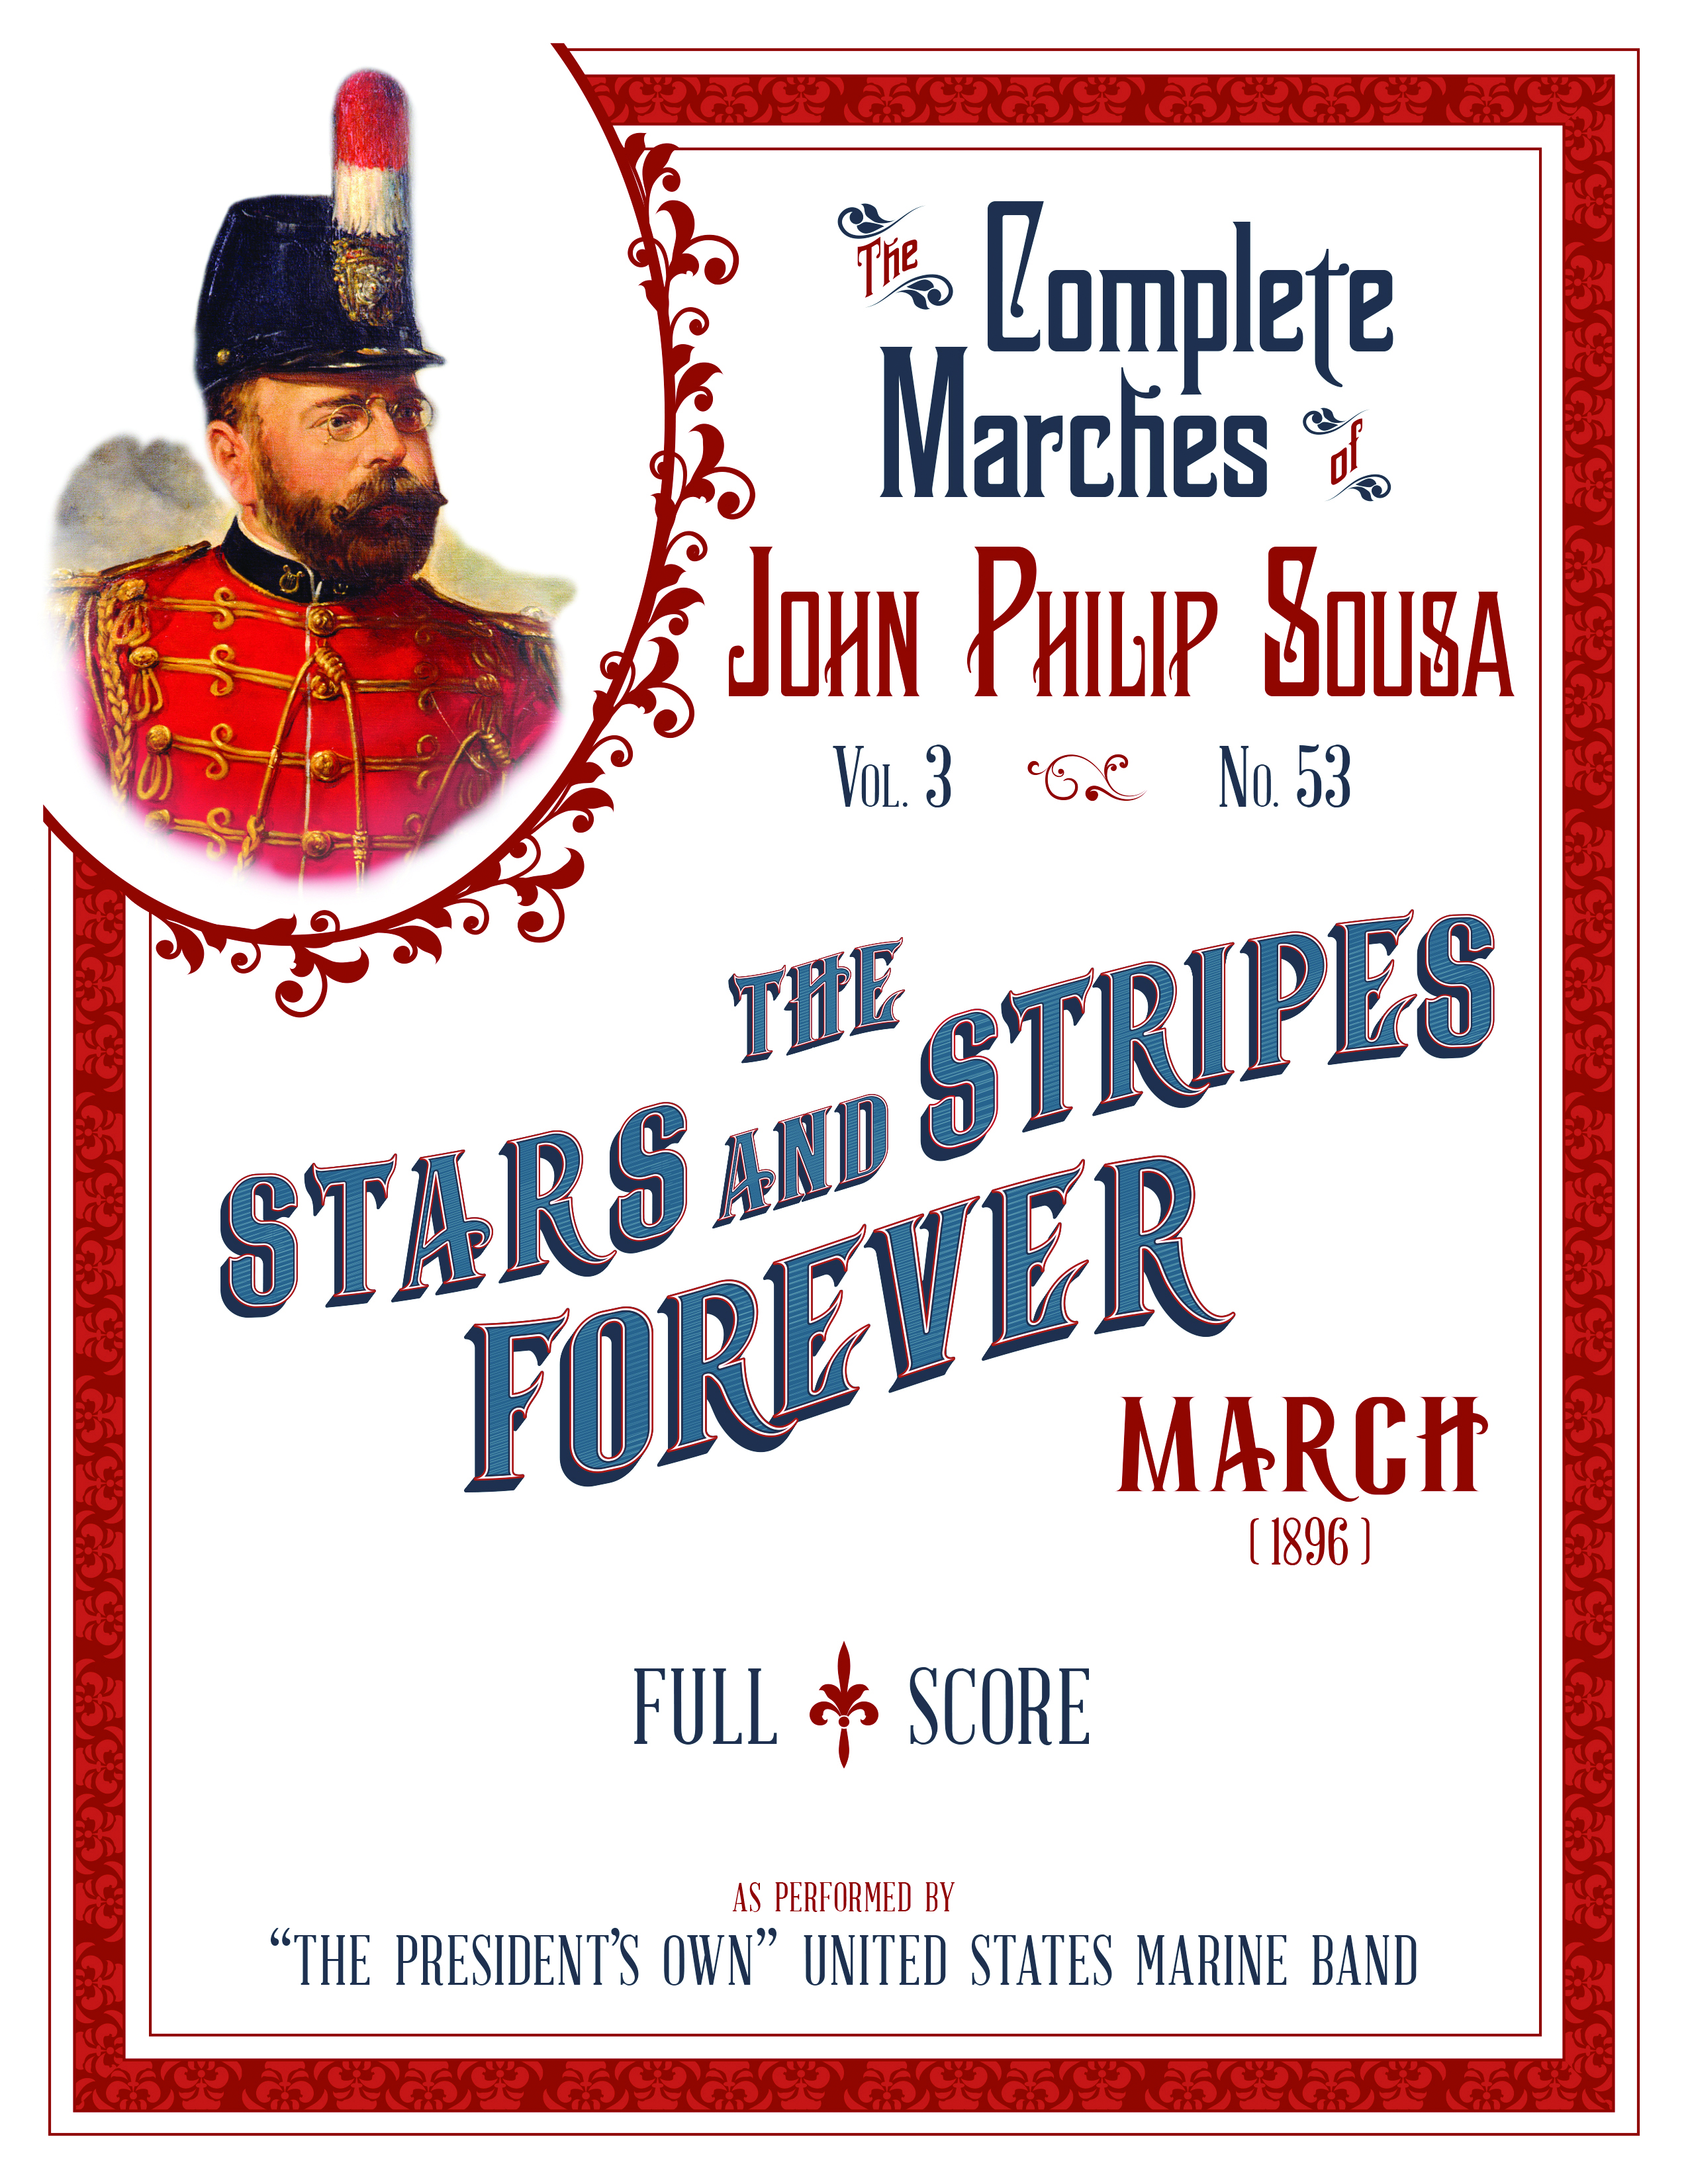 The Stars and Stripes Forever by John Philip Sousa